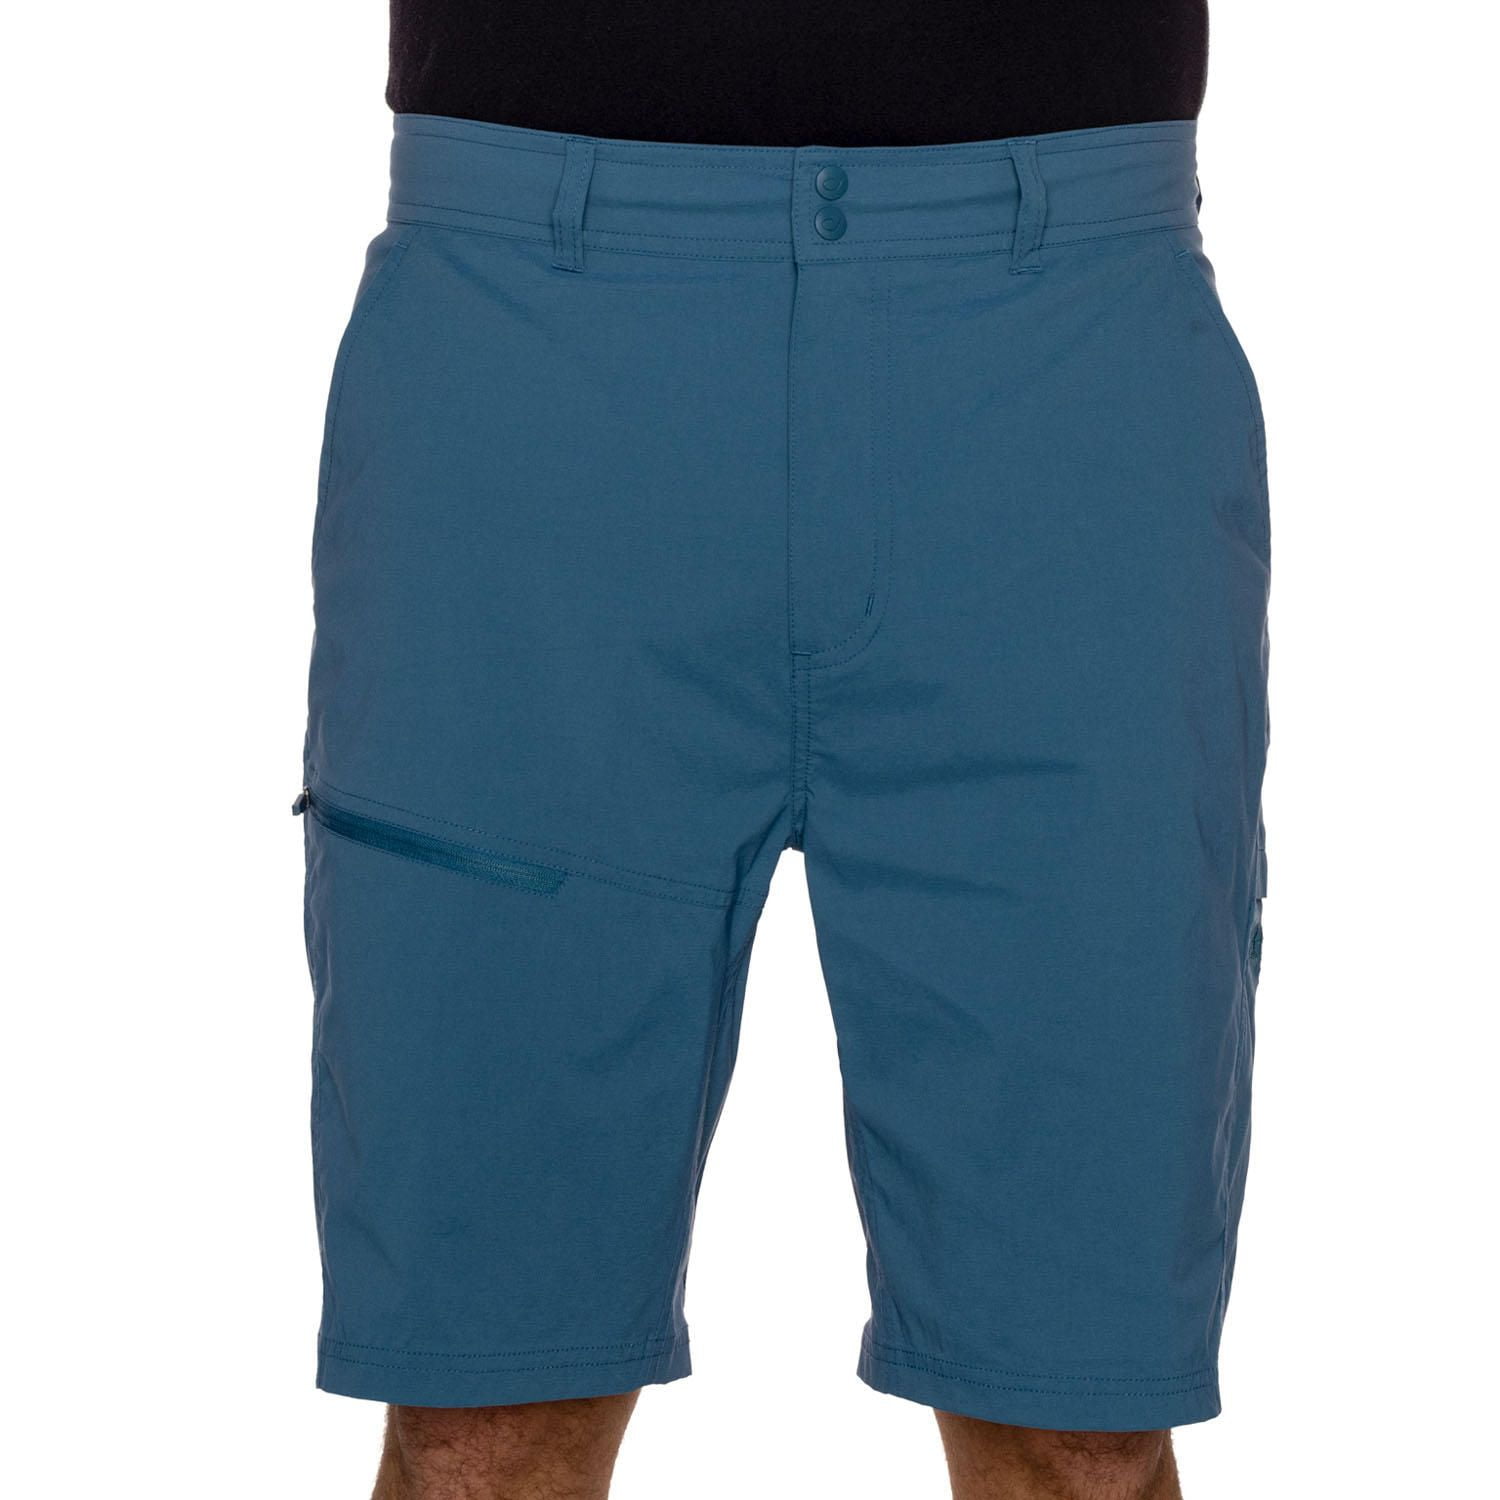 Hot6sl Mens Shorts, Cargo Utility Shorts 100% Cotton Distressed Washed  Style Blue XXXL # Flash Sales Today Deals Prime # Clearance #4